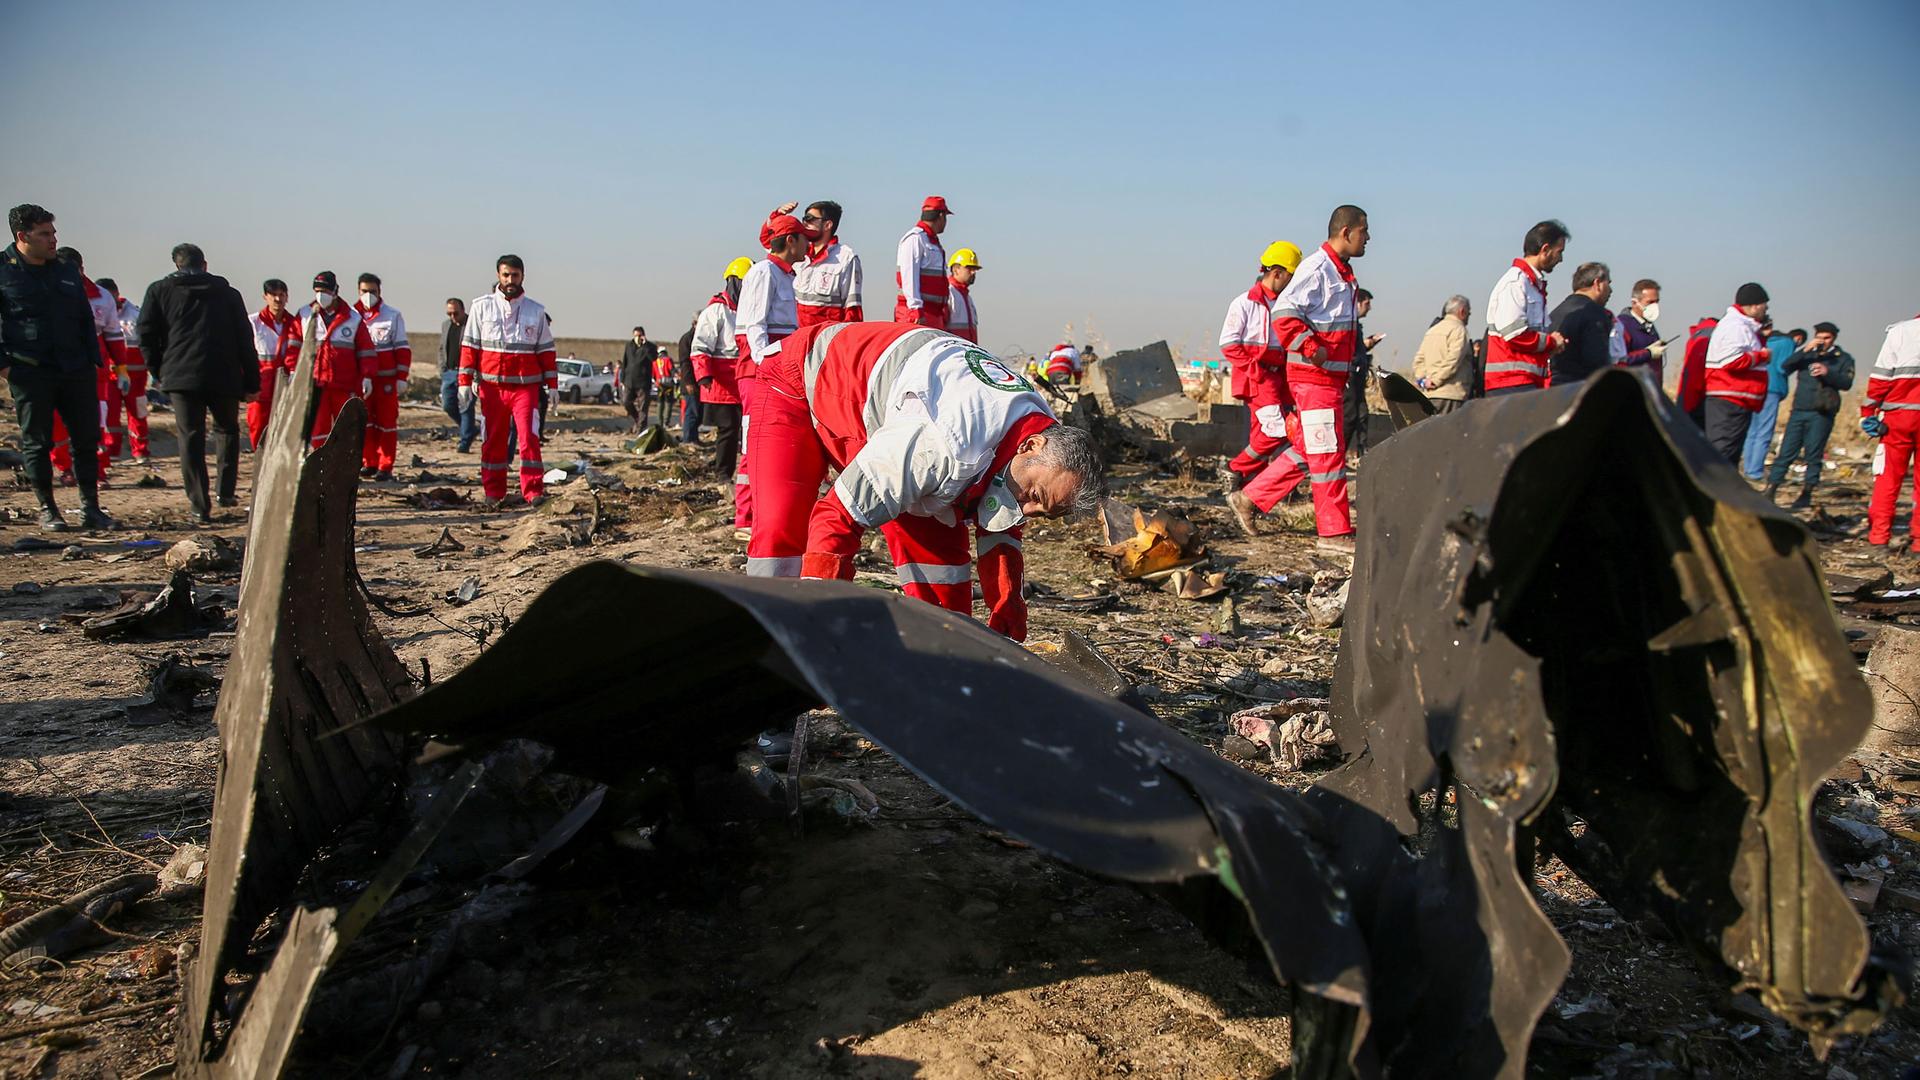 Dozens of workers dressed in red and white overalls are shown at an airplane crash site.